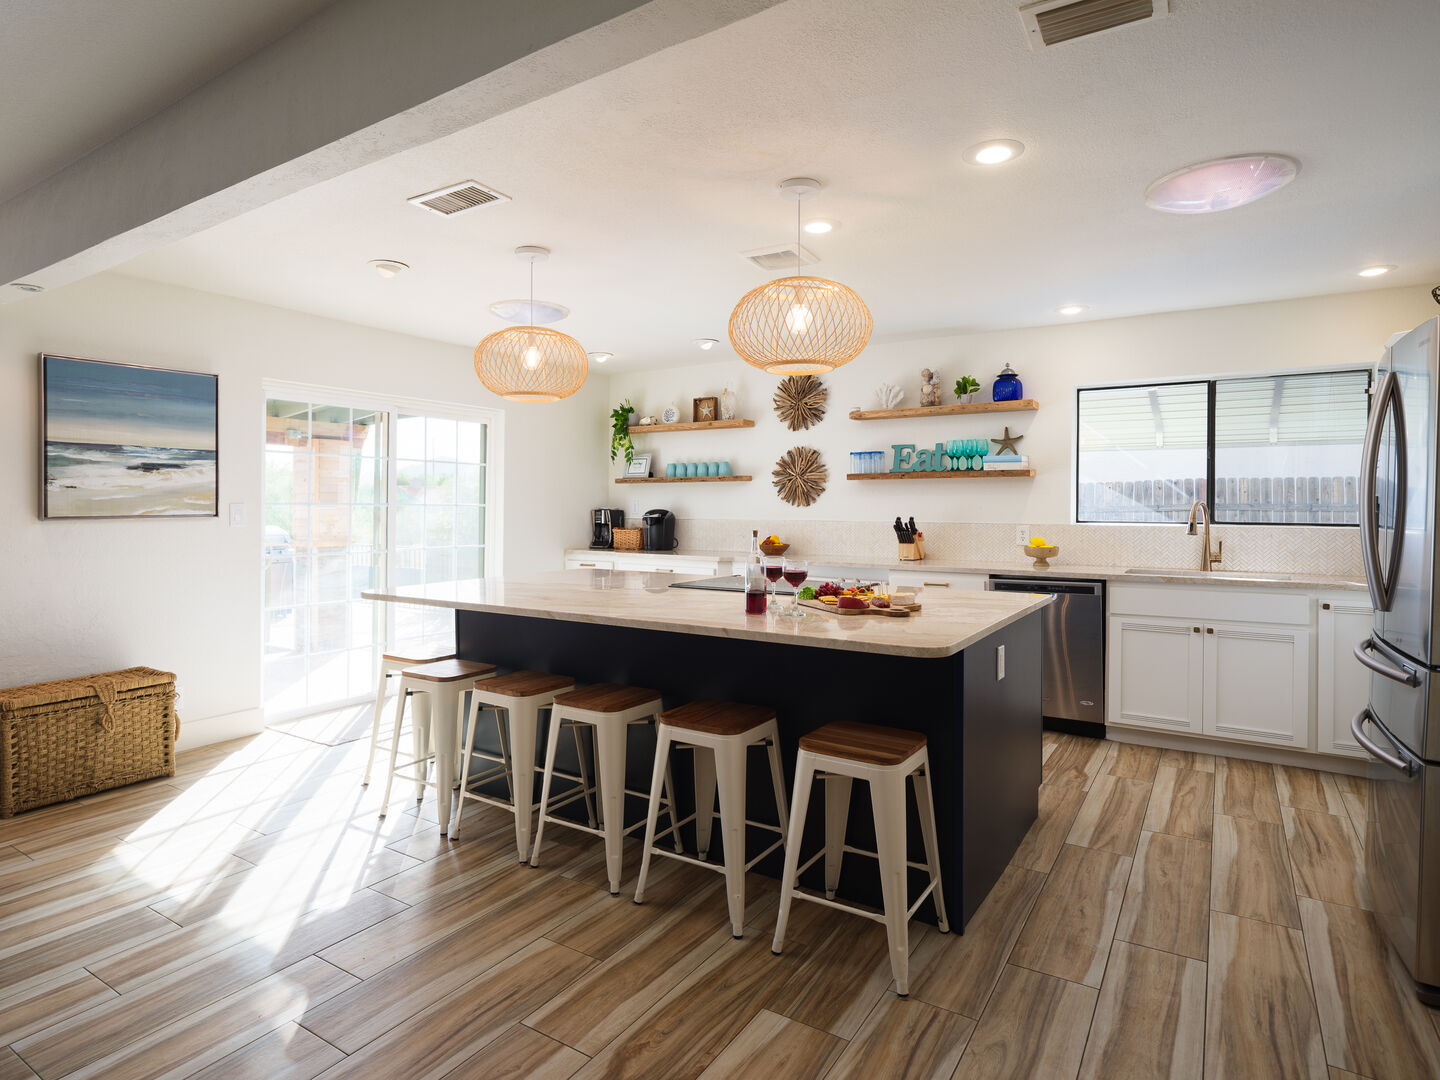 Gorgeous and bright farm-style kitchen. Fully equipped with your basic cooking essentials. Features stainless steel appliances, and breakfast bar seating.